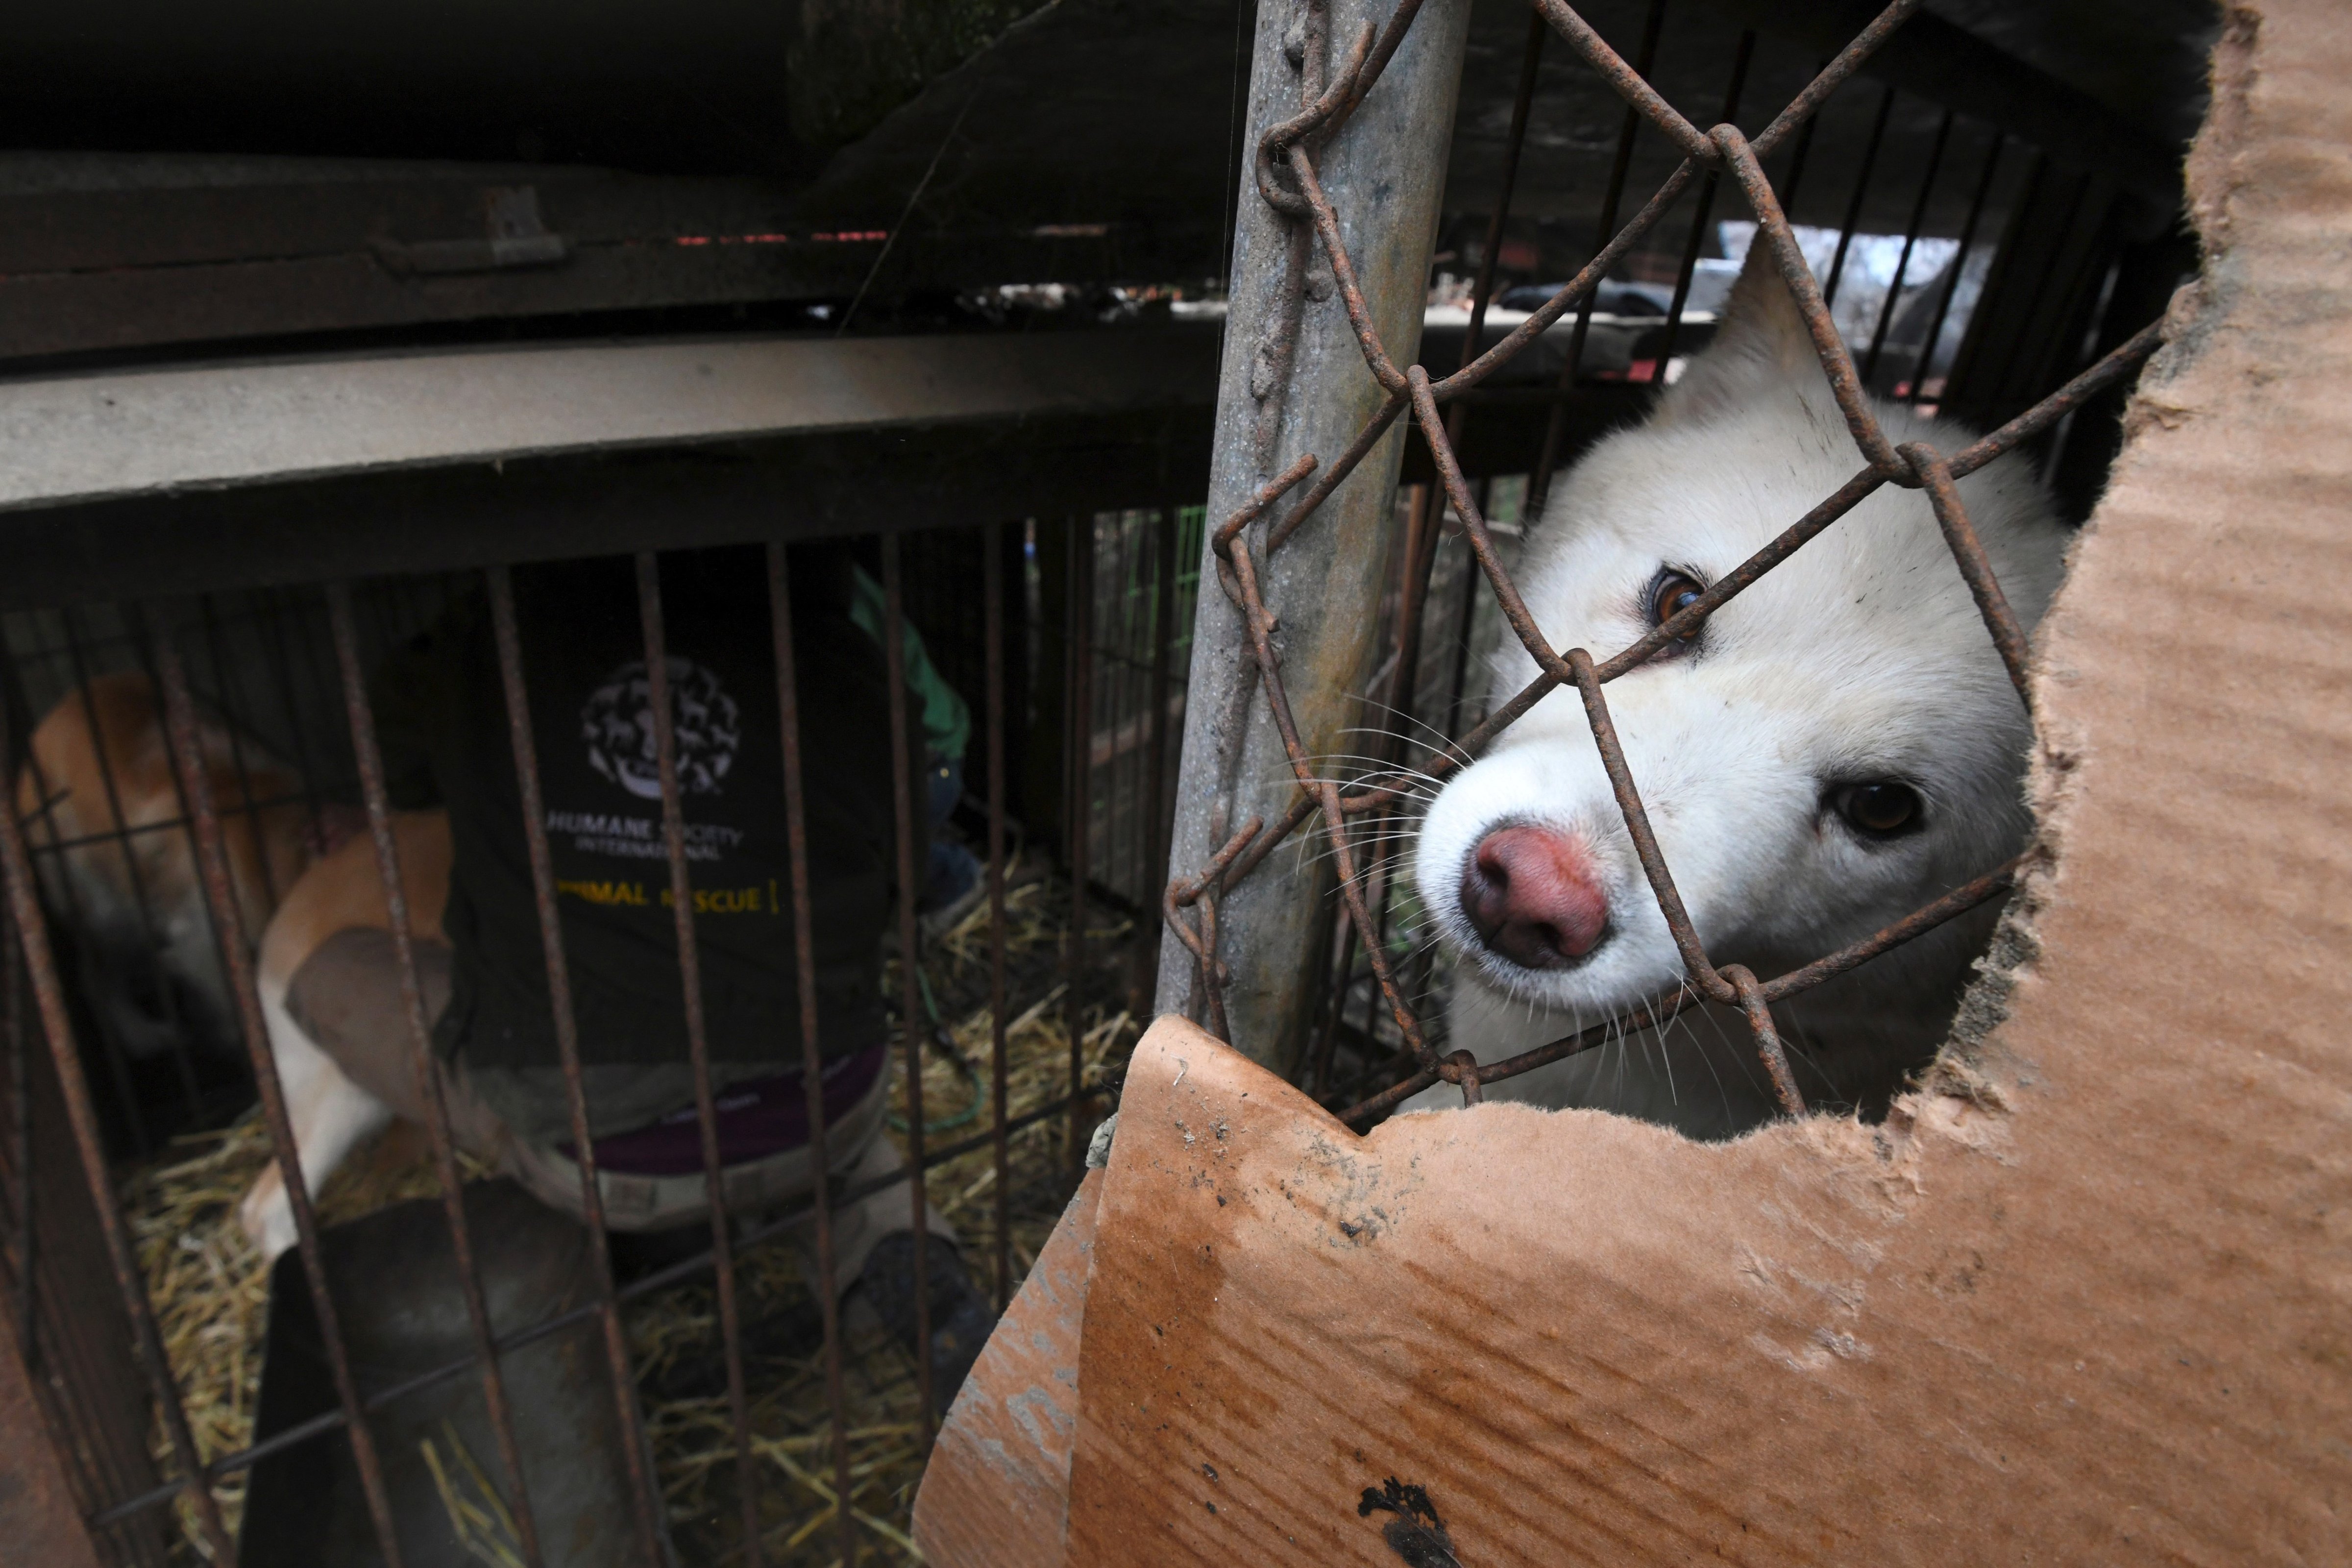 A caged dog at during a rescue event at a dog farm otuside Seoul, South Korea on Nov. 28, 2017. (Jung Yeon-Je—AFP/Getty Images)